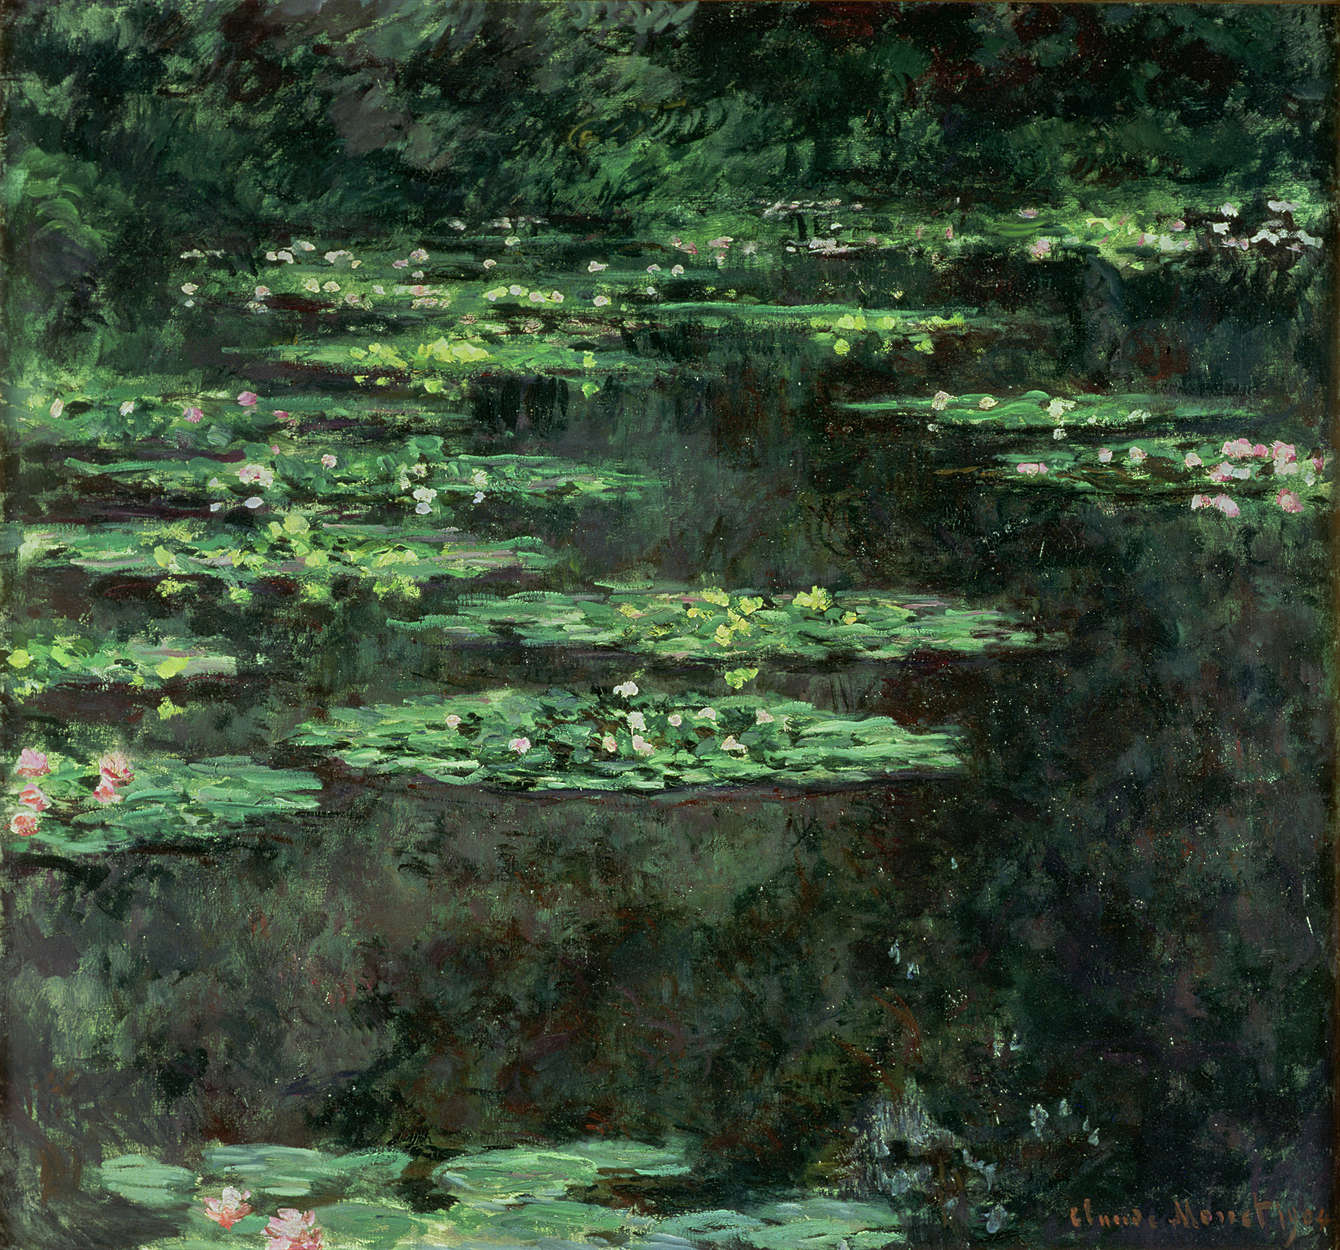             Photo wallpaper "Water Lilies" by Claude Monet
        